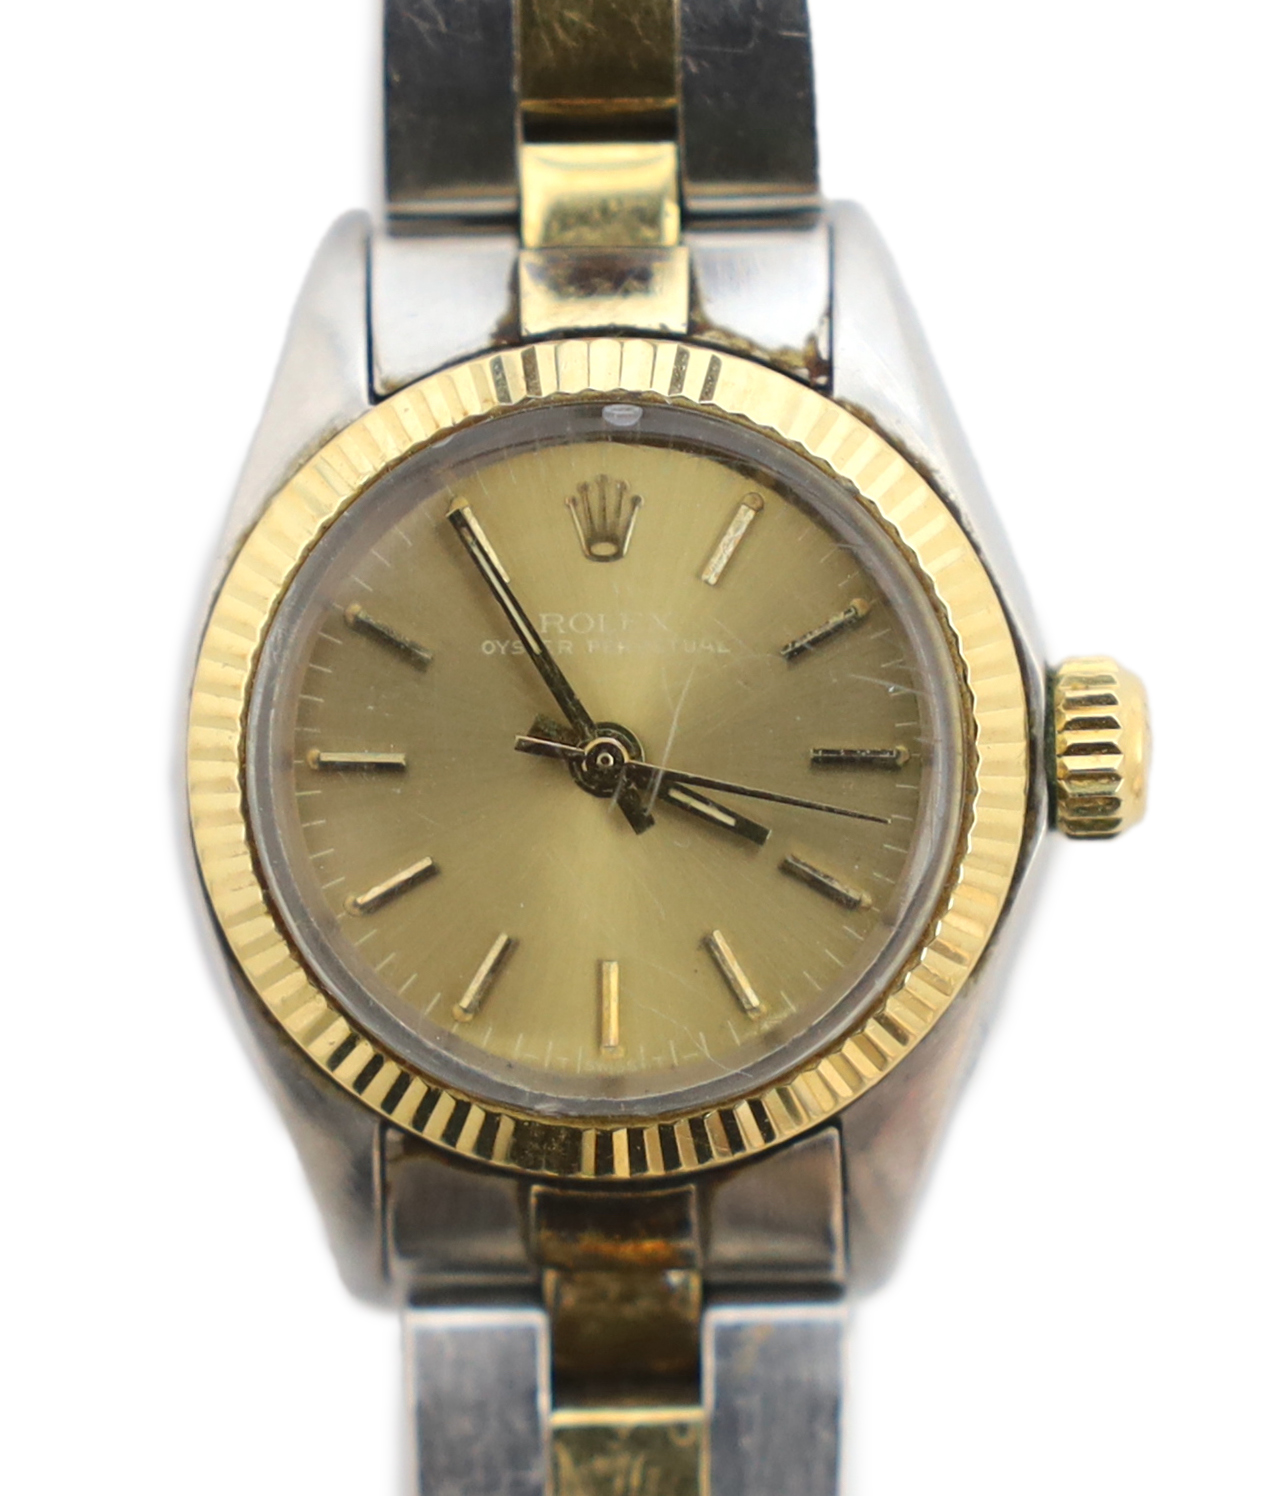 A lady's late 1970's/early 1980's stainless steel and gold Rolex Oyster Perpetual wrist watch